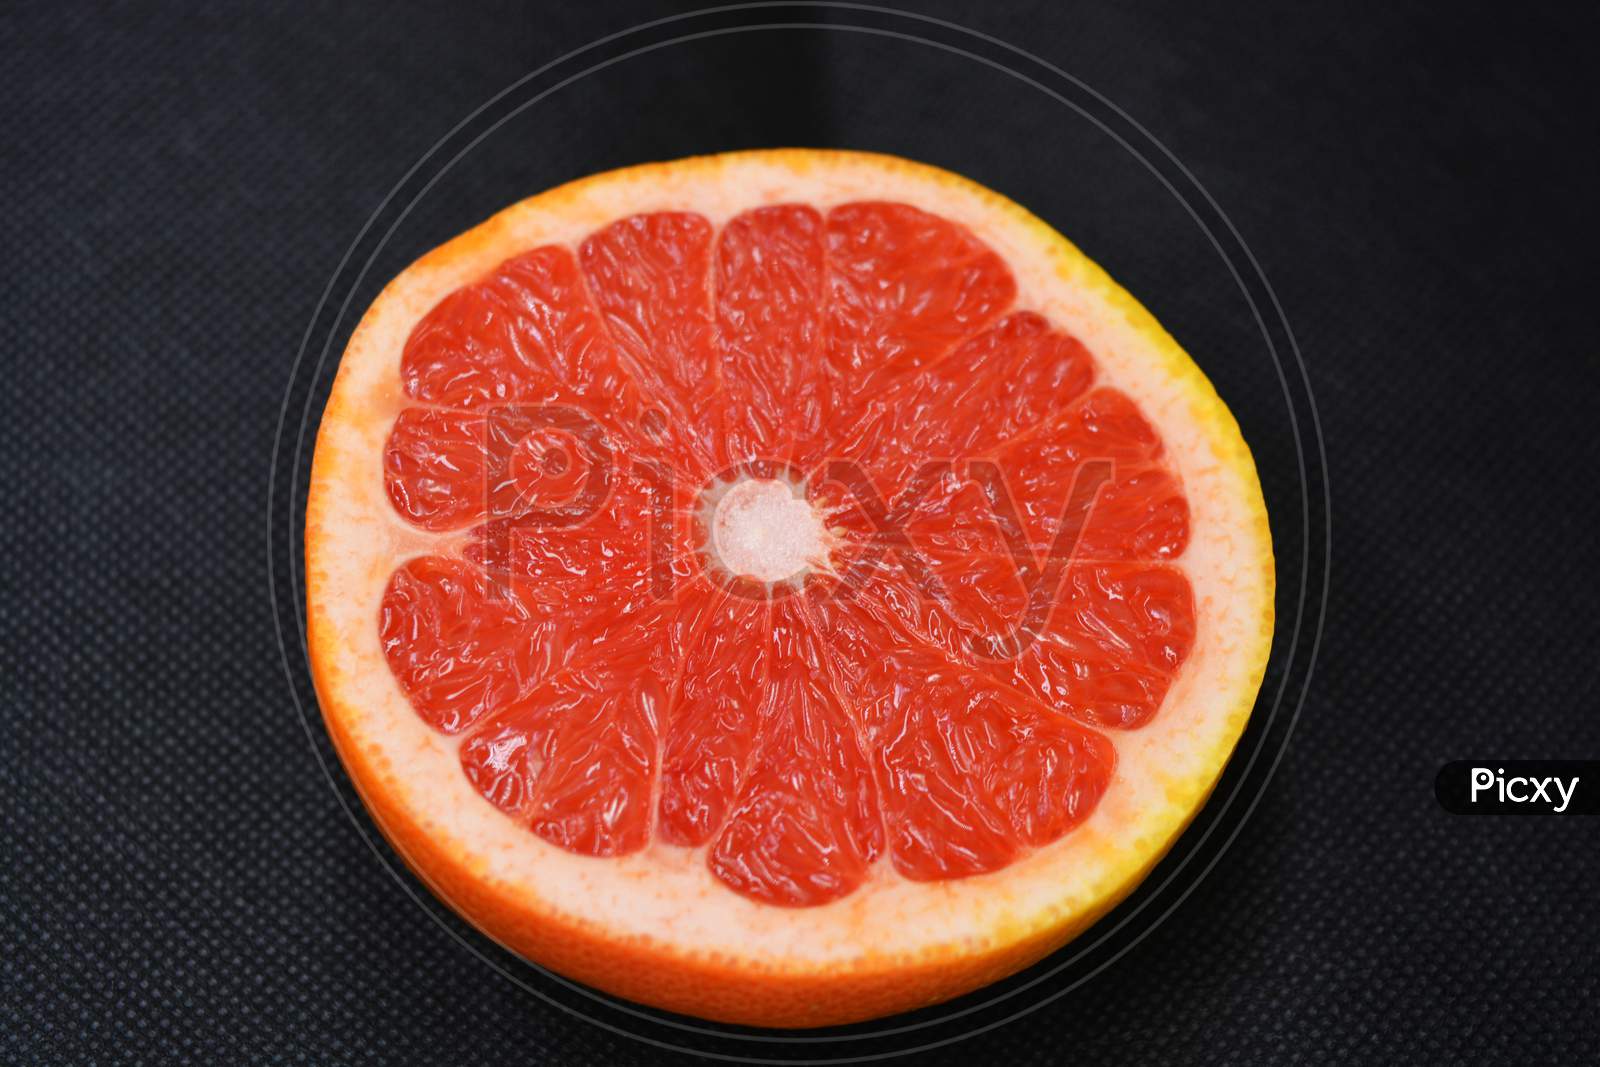 Halves of ripe juicy grapefruit, cut in half, set on a black fabric background. Delicious and healthy sweet and sour fruits for the human body and health.